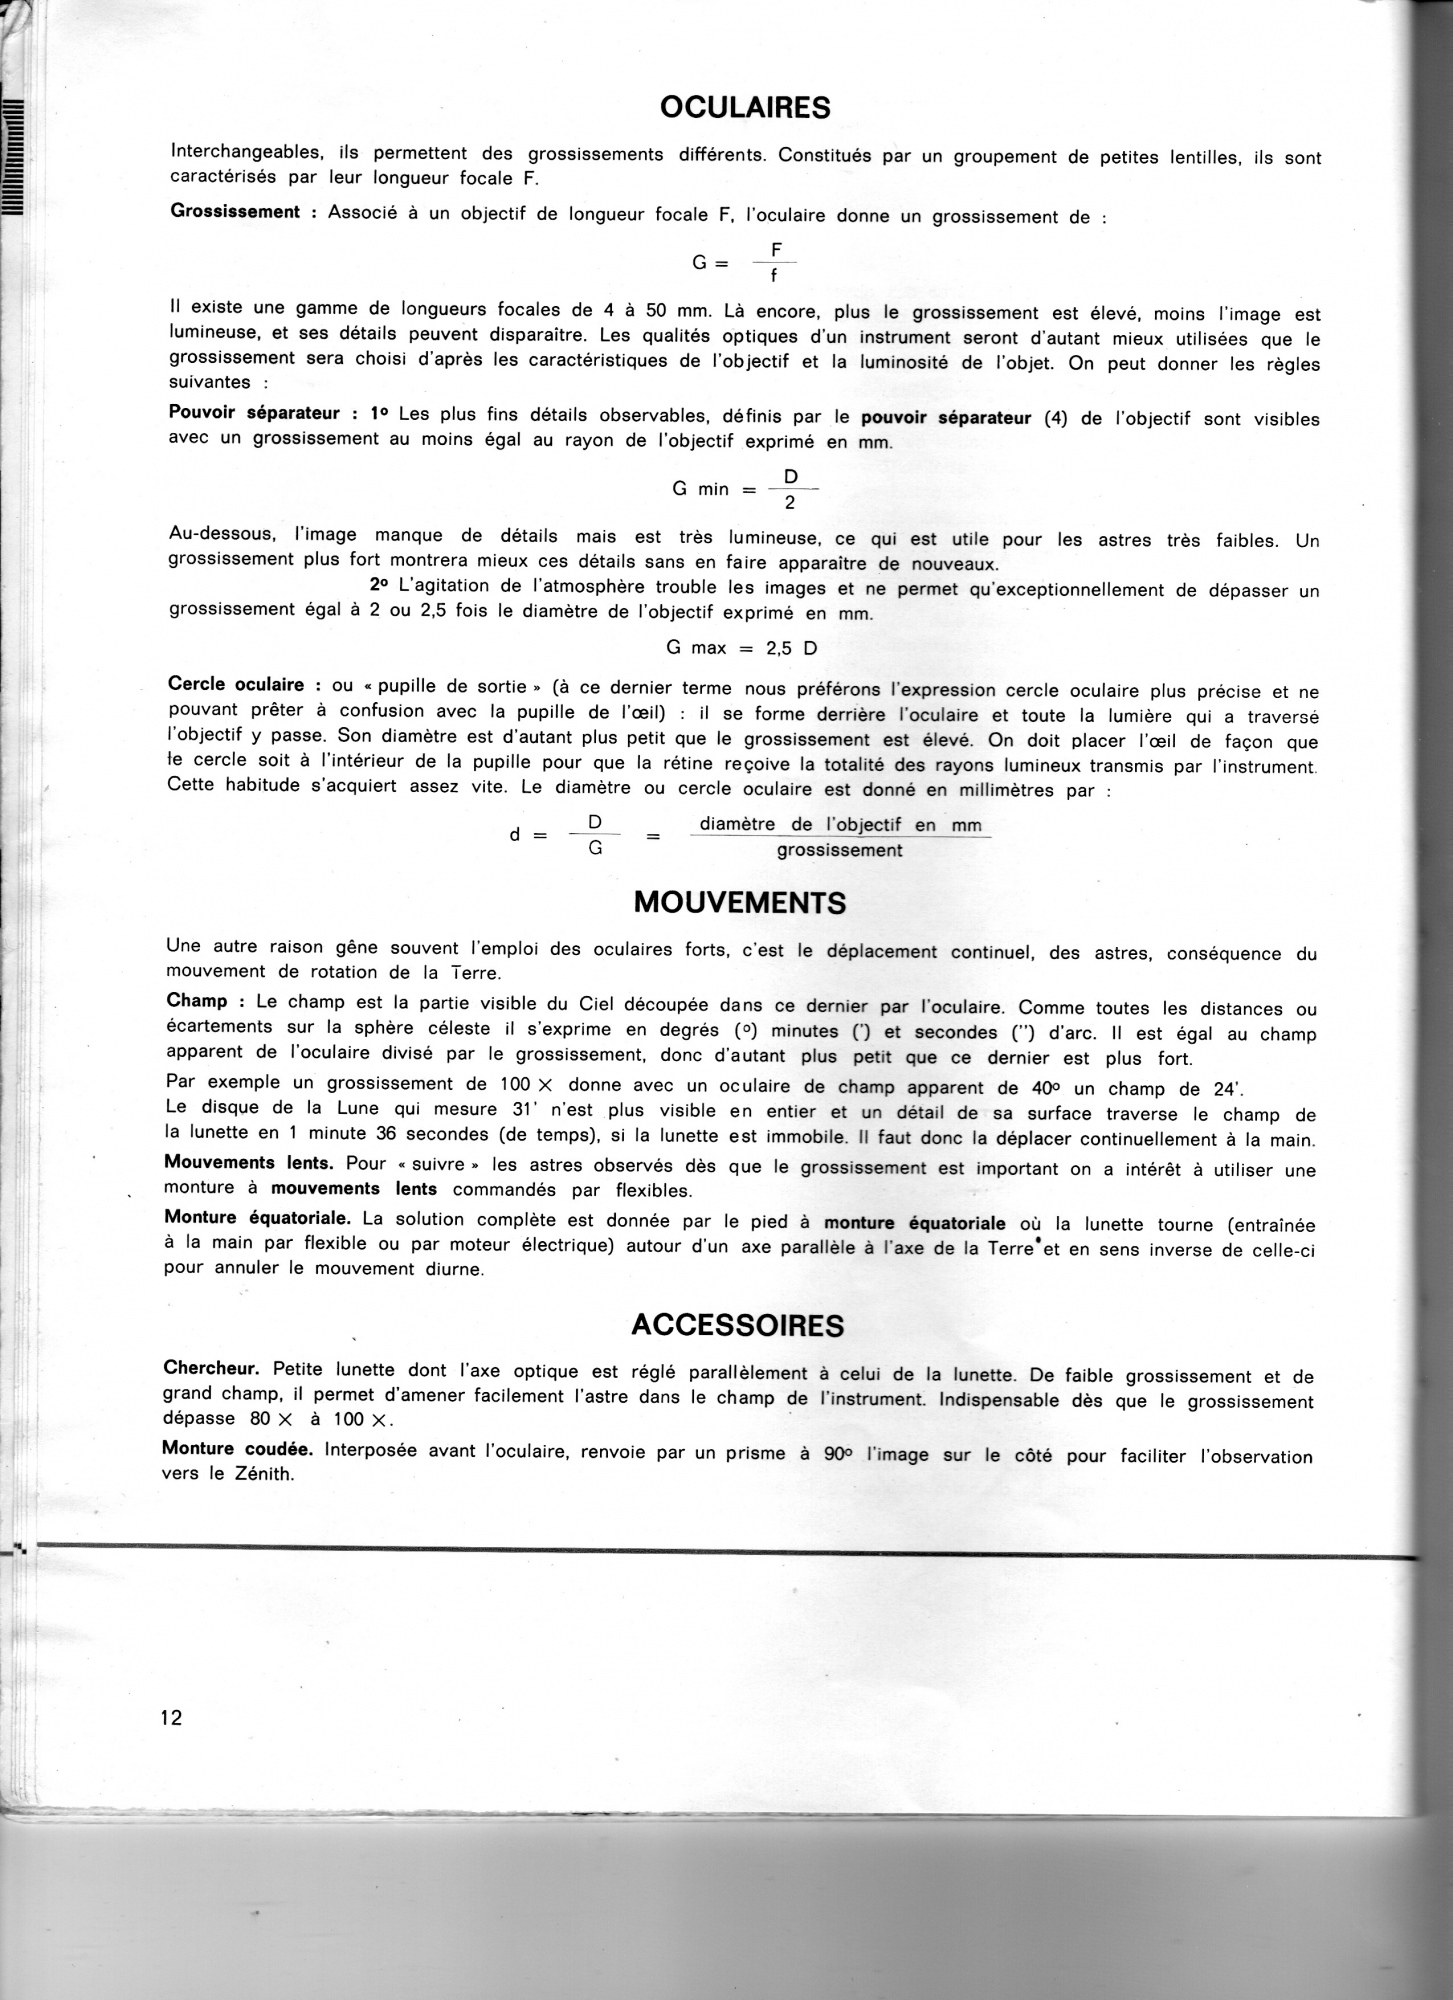 Catalogue Perl 1969 page 12.jpg